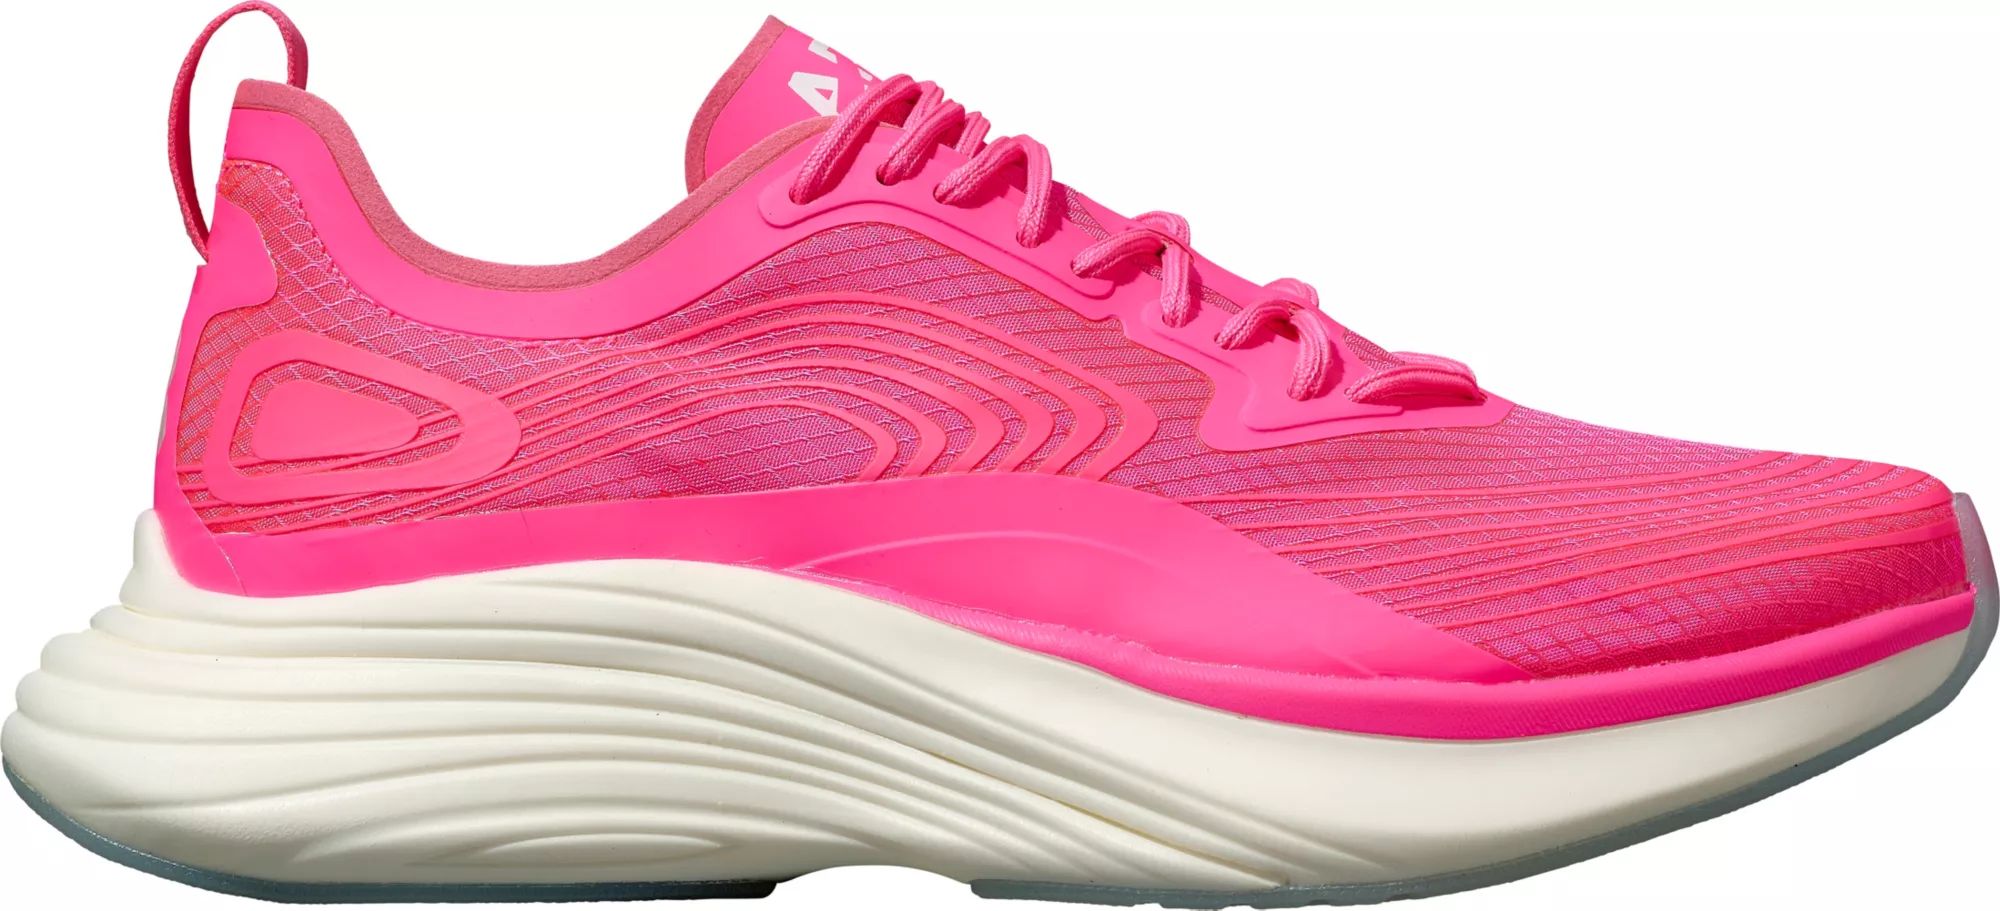 APL Women's Streamline Shoes, Size 7, Fusion Pink | Dick's Sporting Goods